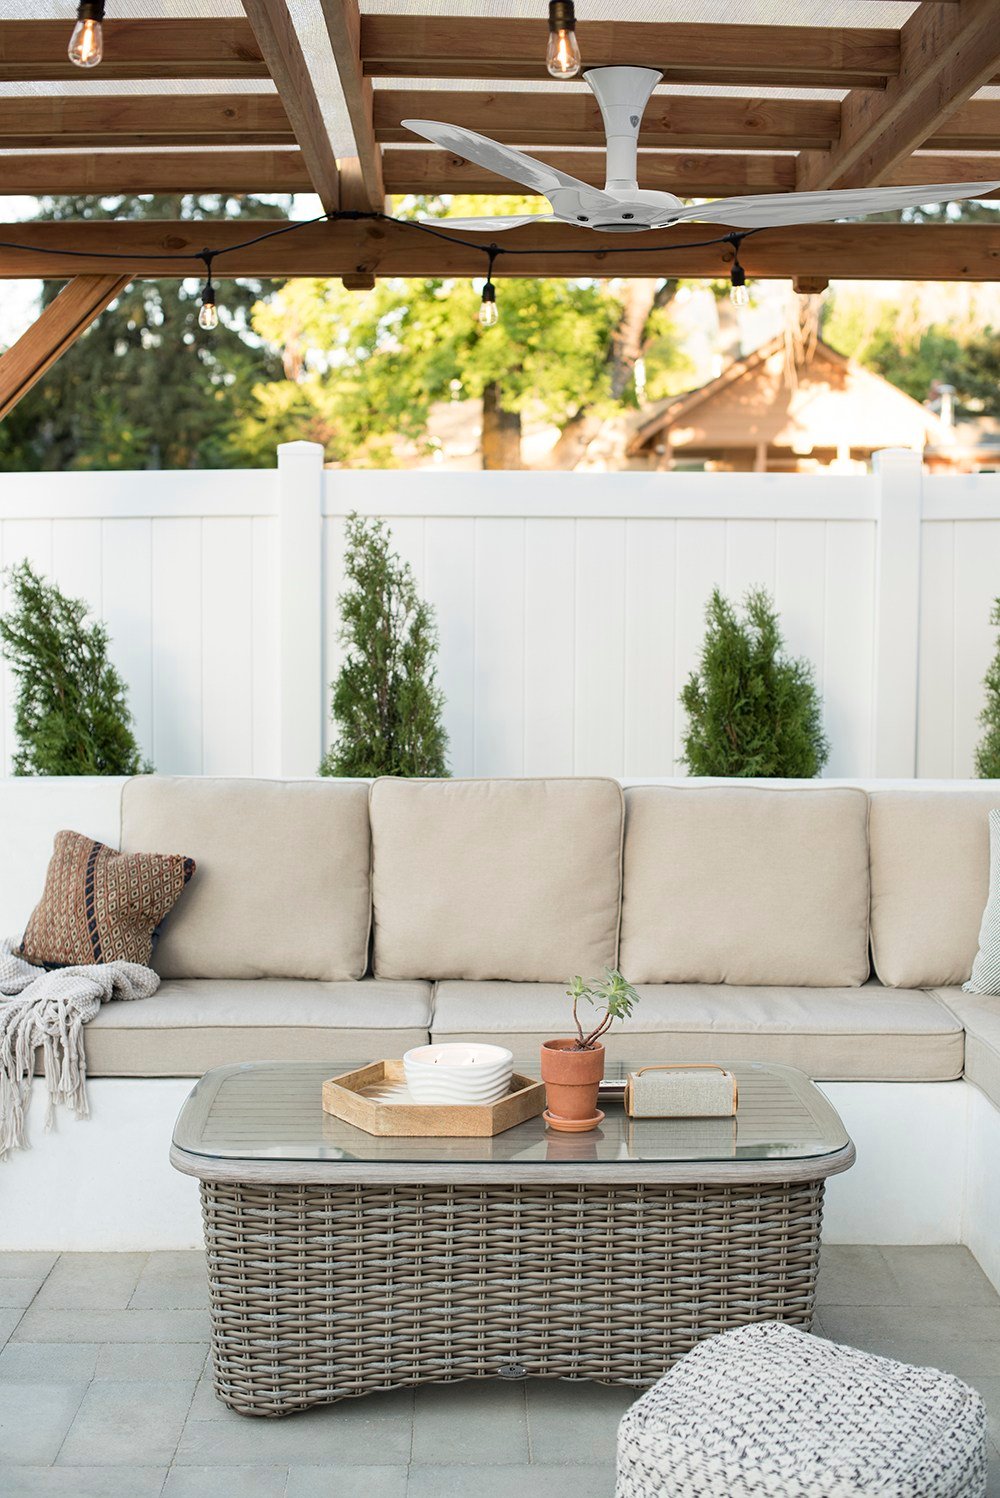 10 Outdoor Posts to Enjoy & Inspire - roomfortuesday.com